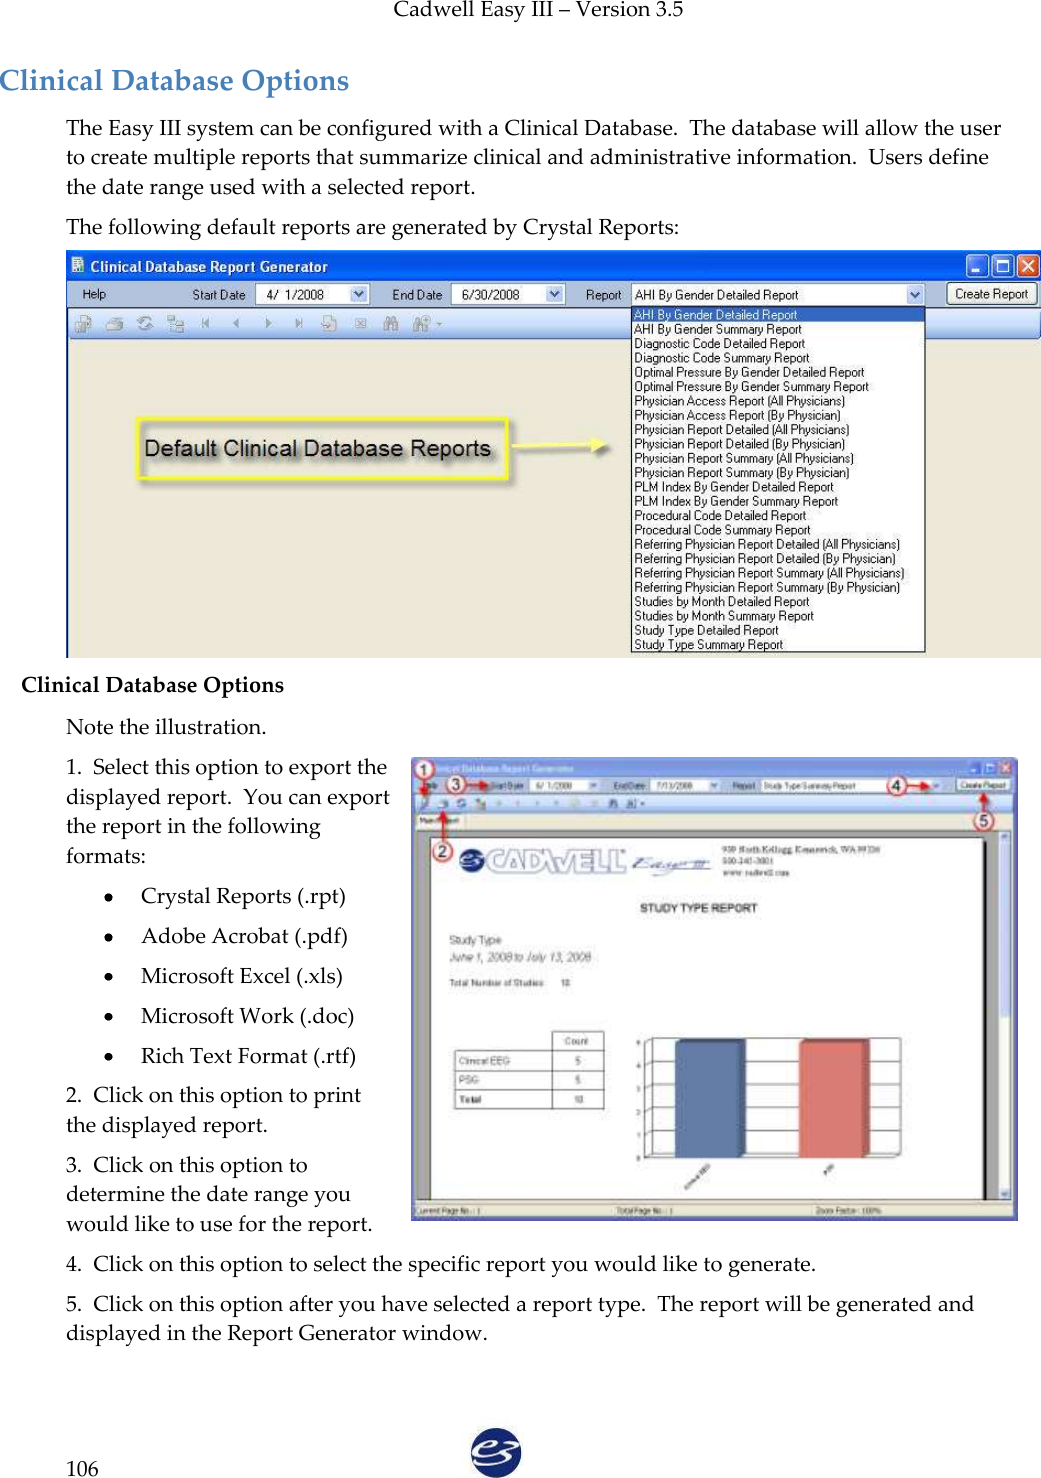 Cadwell Easy III – Version 3.5   106 Clinical Database Options The Easy III system can be configured with a Clinical Database.  The database will allow the user to create multiple reports that summarize clinical and administrative information.  Users define the date range used with a selected report. The following default reports are generated by Crystal Reports:  Clinical Database Options Note the illustration. 1.  Select this option to export the displayed report.  You can export the report in the following formats:  Crystal Reports (.rpt)  Adobe Acrobat (.pdf)  Microsoft Excel (.xls)  Microsoft Work (.doc)  Rich Text Format (.rtf) 2.  Click on this option to print the displayed report. 3.  Click on this option to determine the date range you would like to use for the report. 4.  Click on this option to select the specific report you would like to generate. 5.  Click on this option after you have selected a report type.  The report will be generated and displayed in the Report Generator window.  